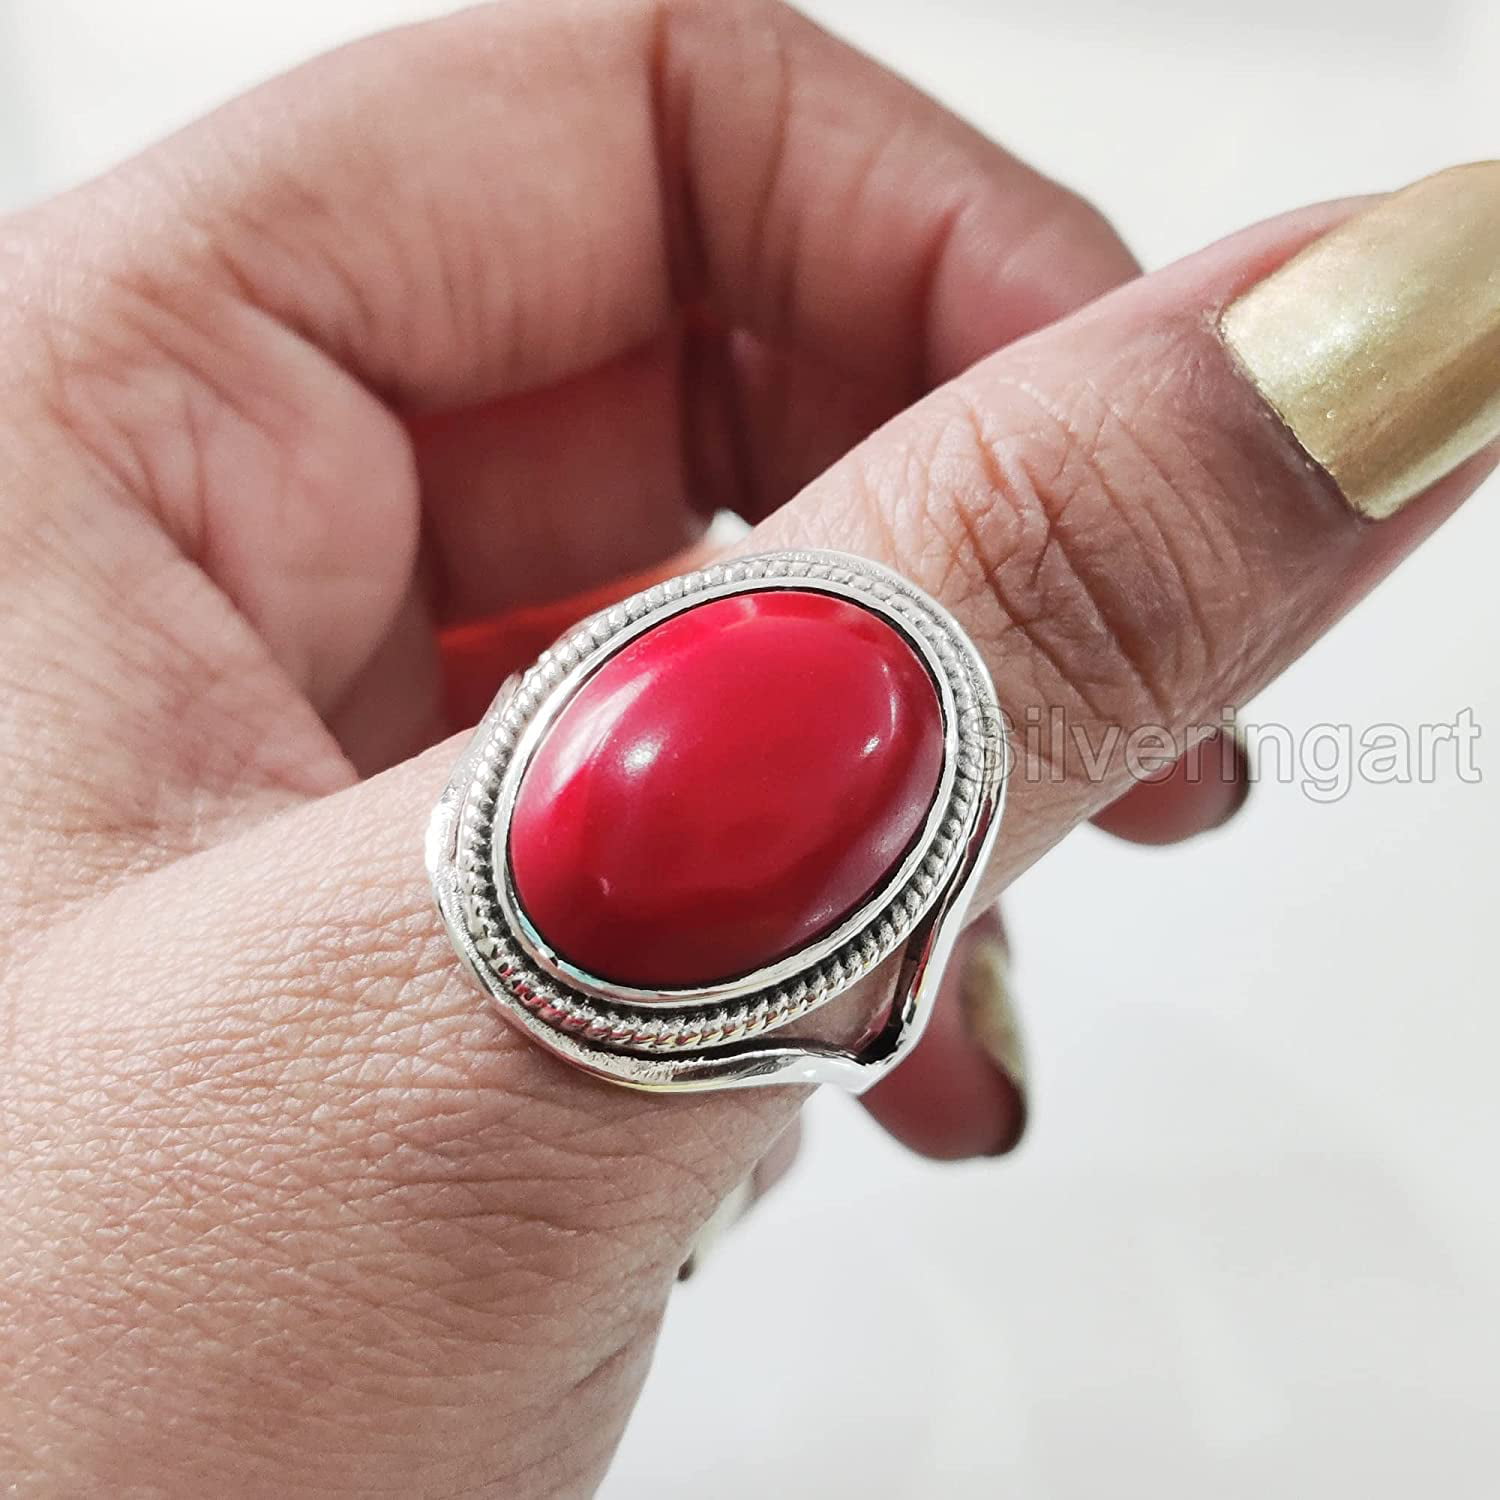 On which finger should I wear a red coral stone if I already have a ruby on  my right-hand ring finger? - Quora